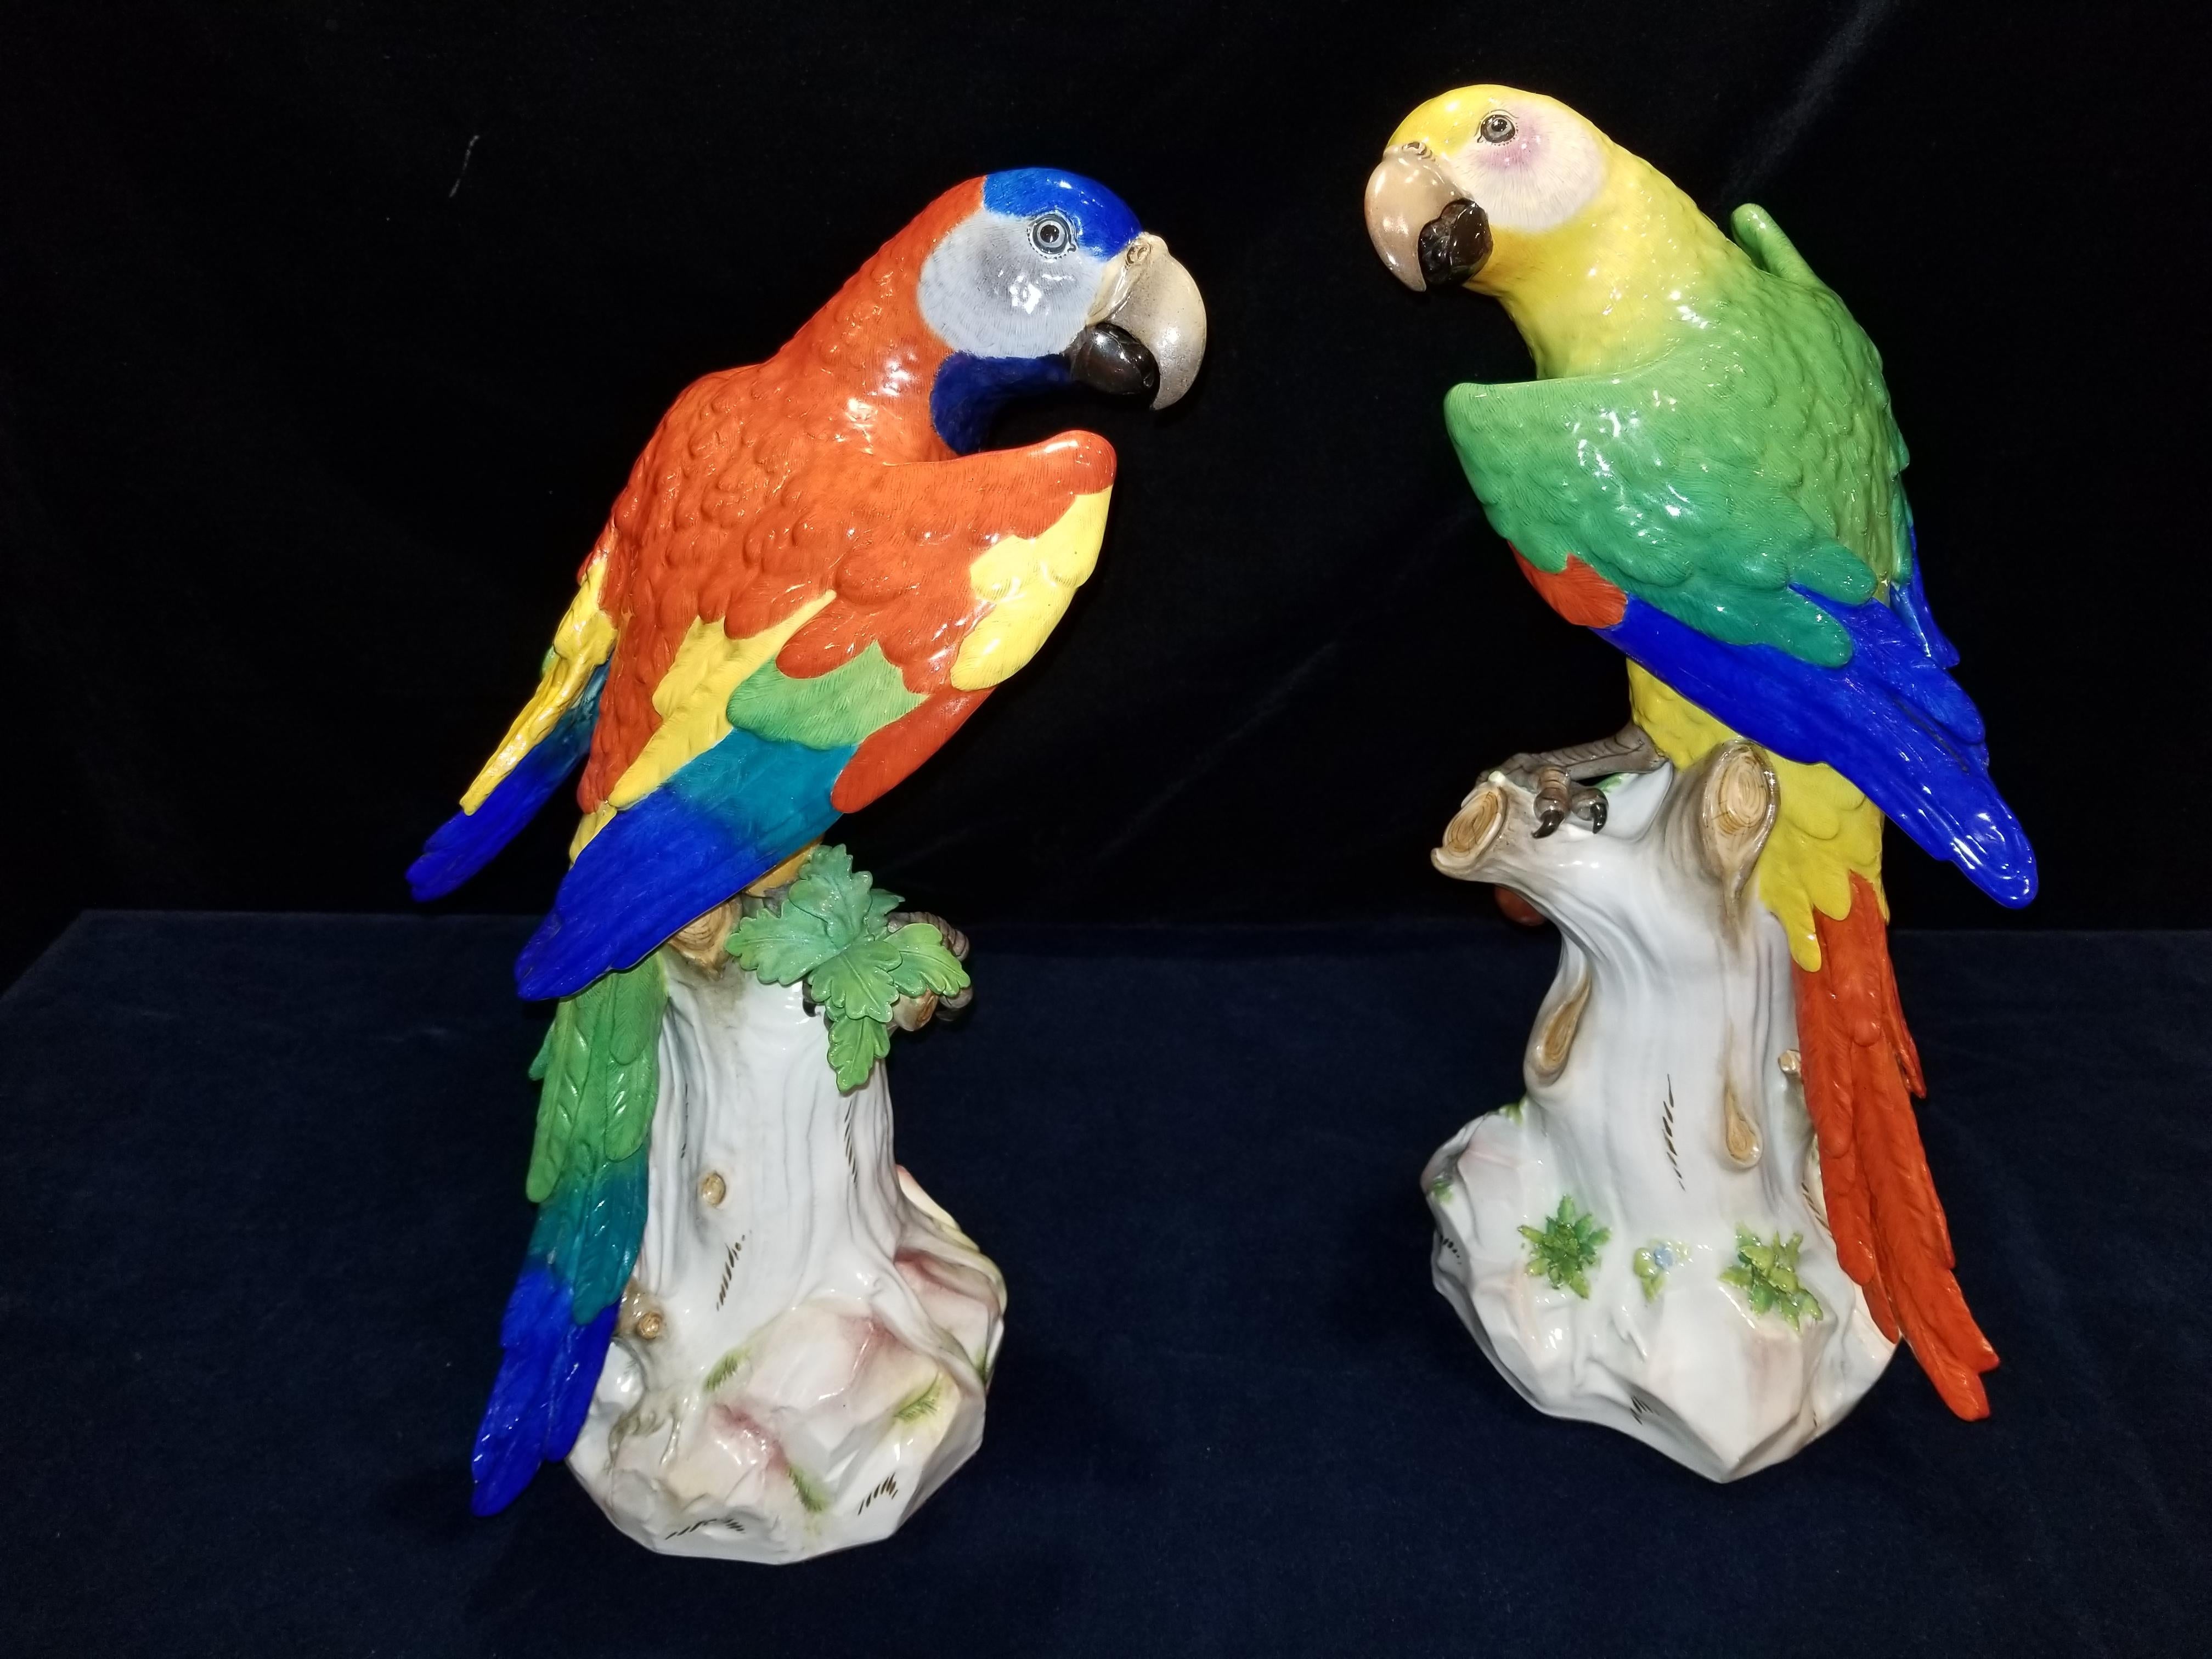 A Magnificent and large pair of antique meissen porcelain figures of colorful parrots, each standing on a tree branch with cherries and beautiful foliage after a model by J. J. Kandler. Both parrots have their wings out as if about to take flight,